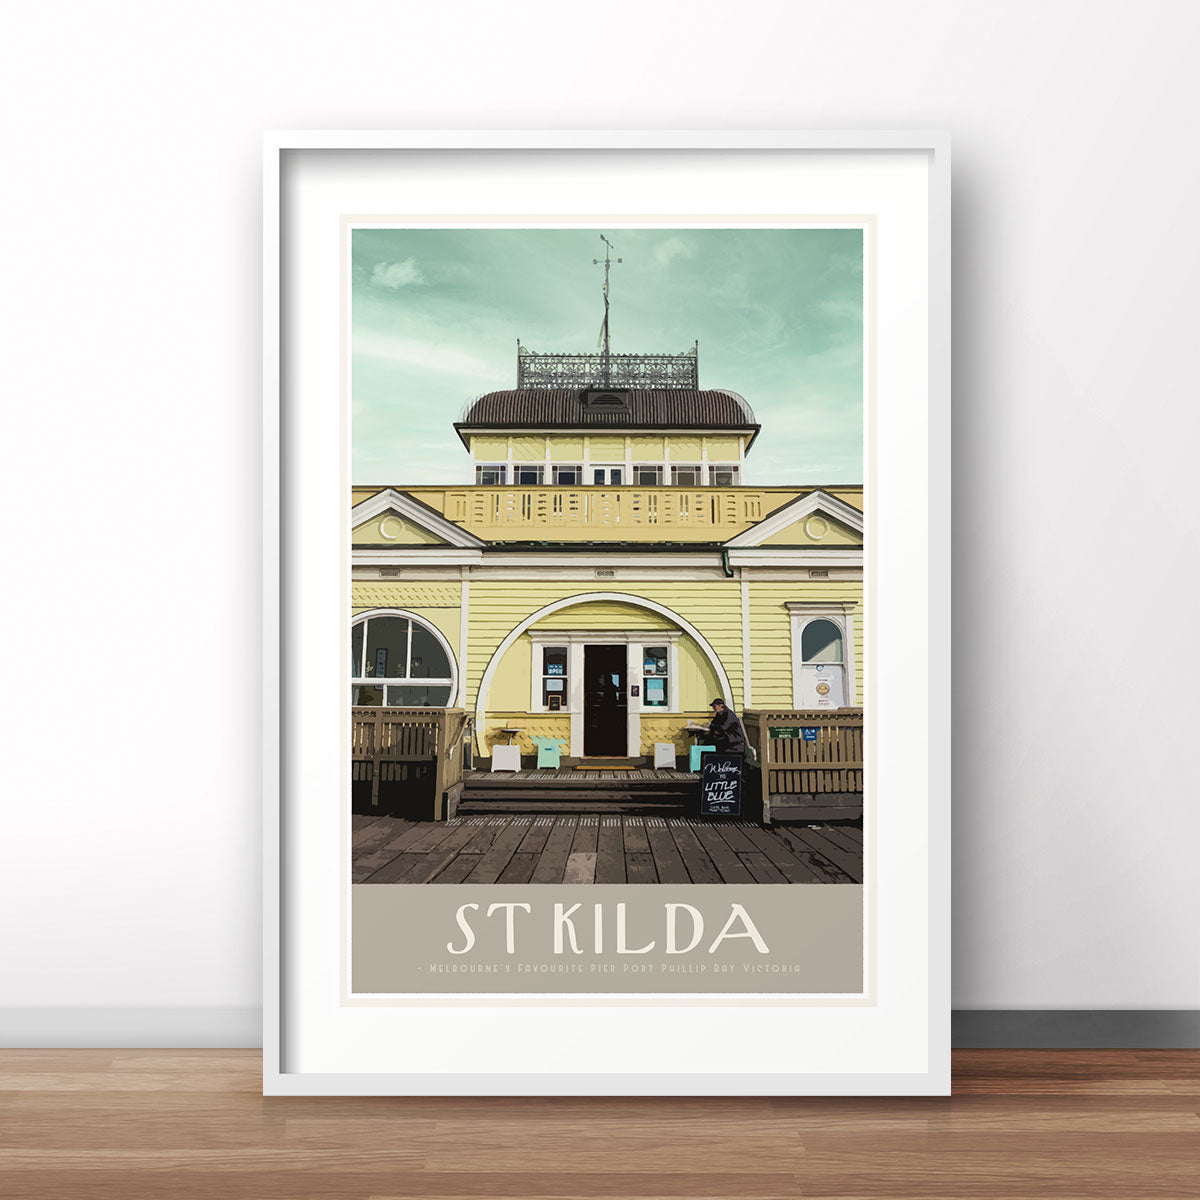 Melbourne poster, st kilda, retro vintage print from Places We Luv